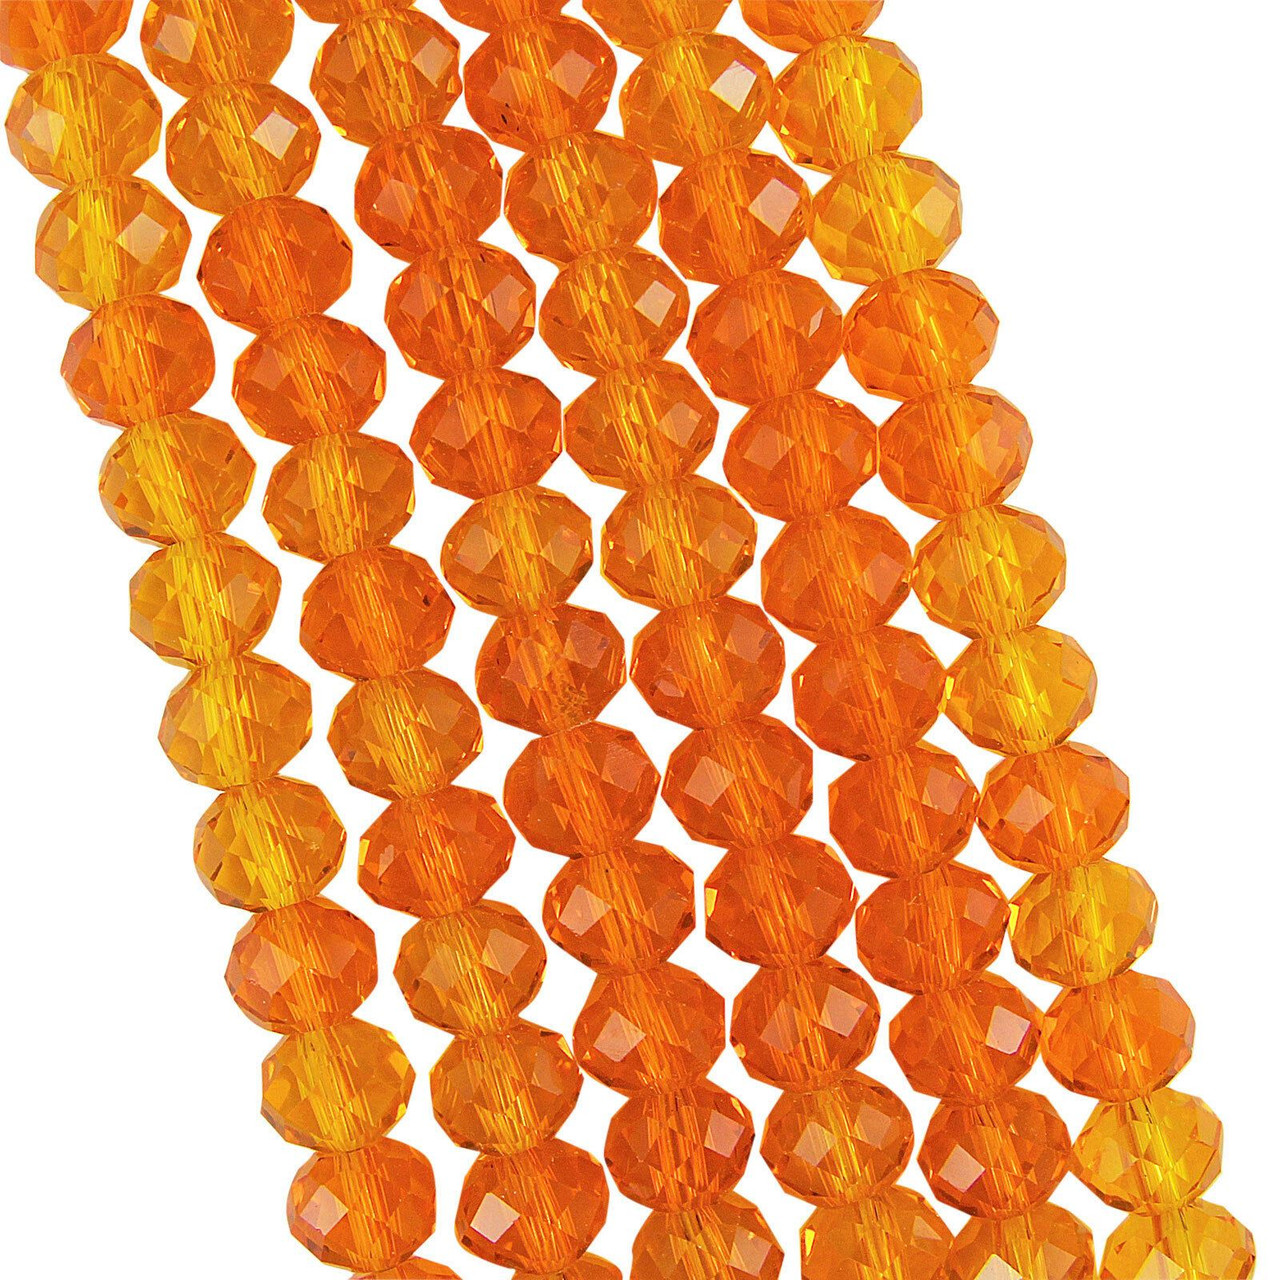 6x4mm Faceted Glass Rondelles - LIGHT ORANGE - approx 100 beads / 16 inch strand